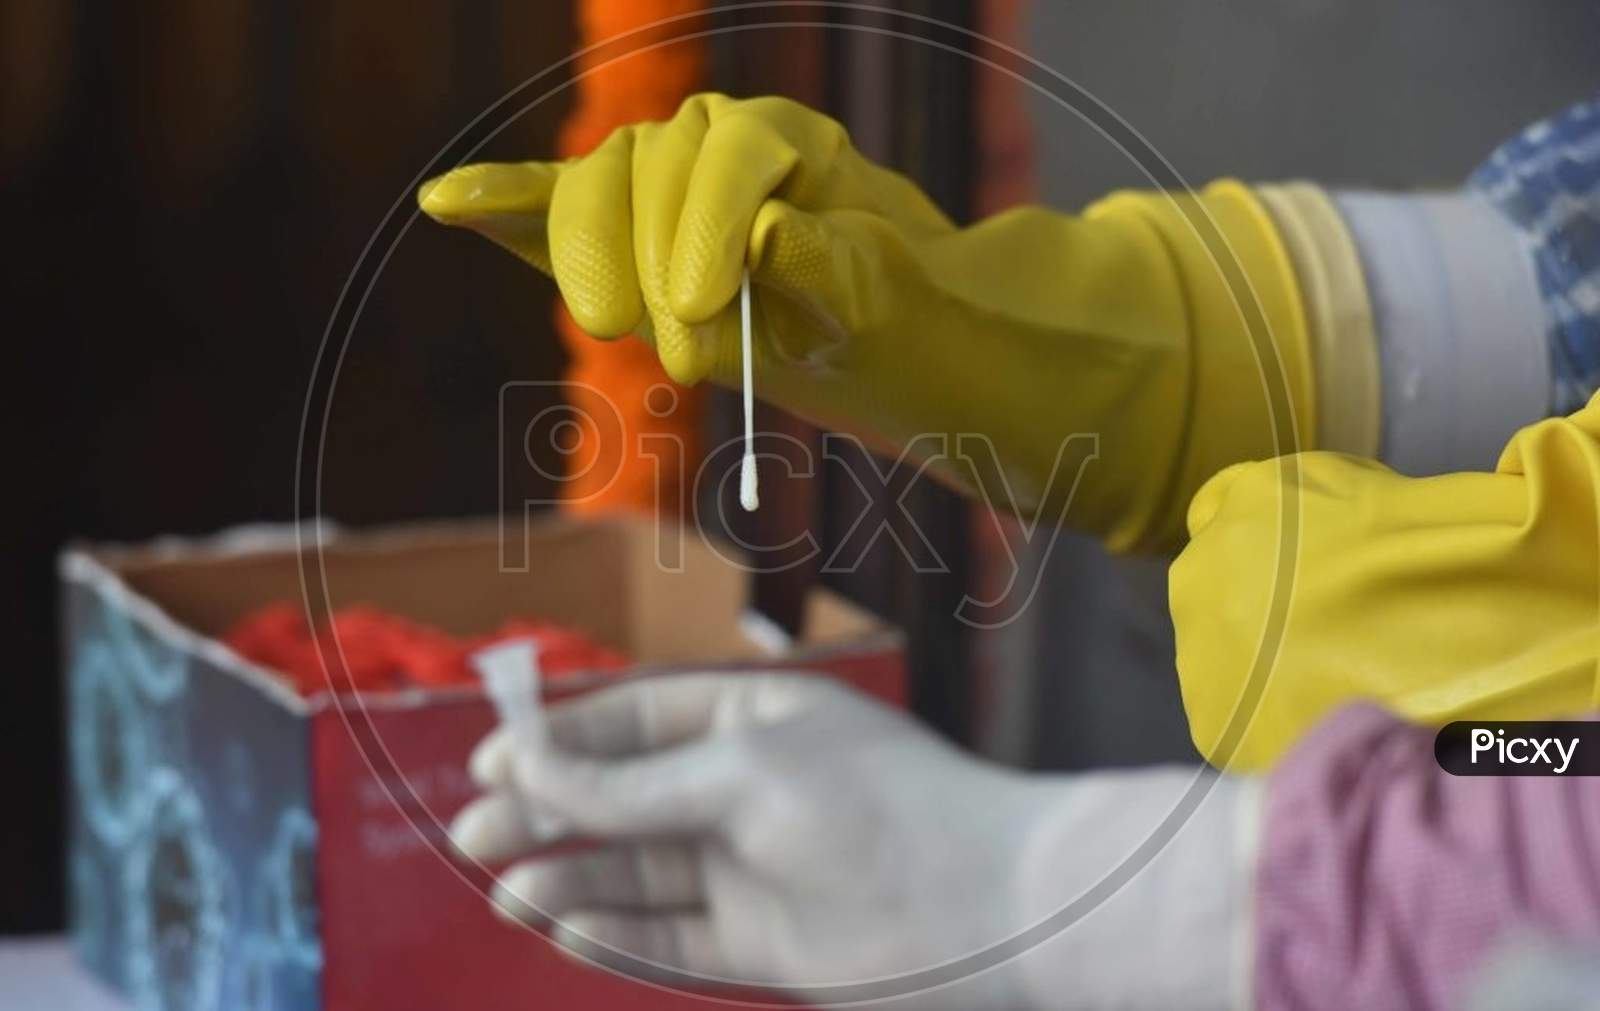 Patna, India - July 14: A Medical Worker Handles A Swab Sample Taken For Covid-19 Rapid Testing At Gardiner Hospital On July 14, 2020 In Patna, India